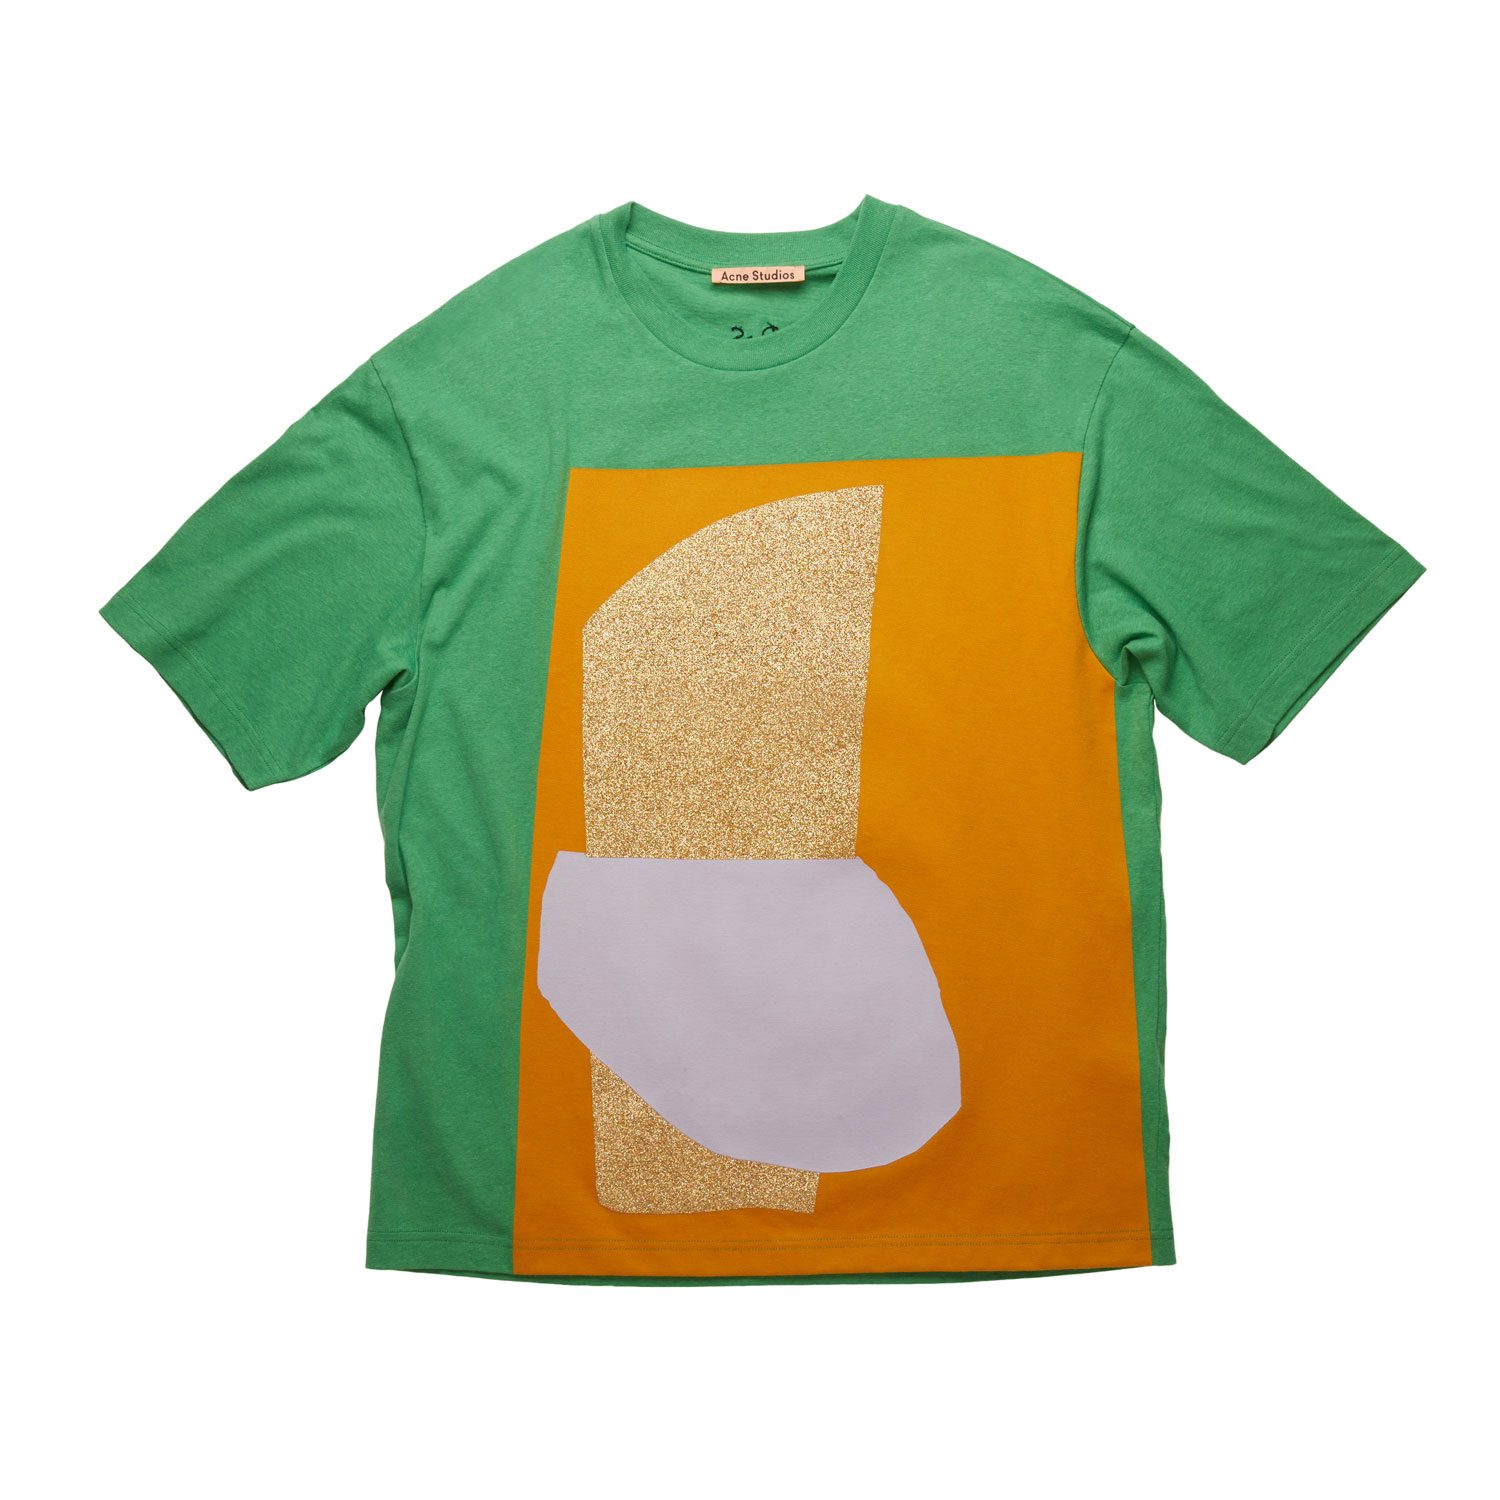 One of Acne Studios’s limited-edition T-shirts designed by Daniel Silver.